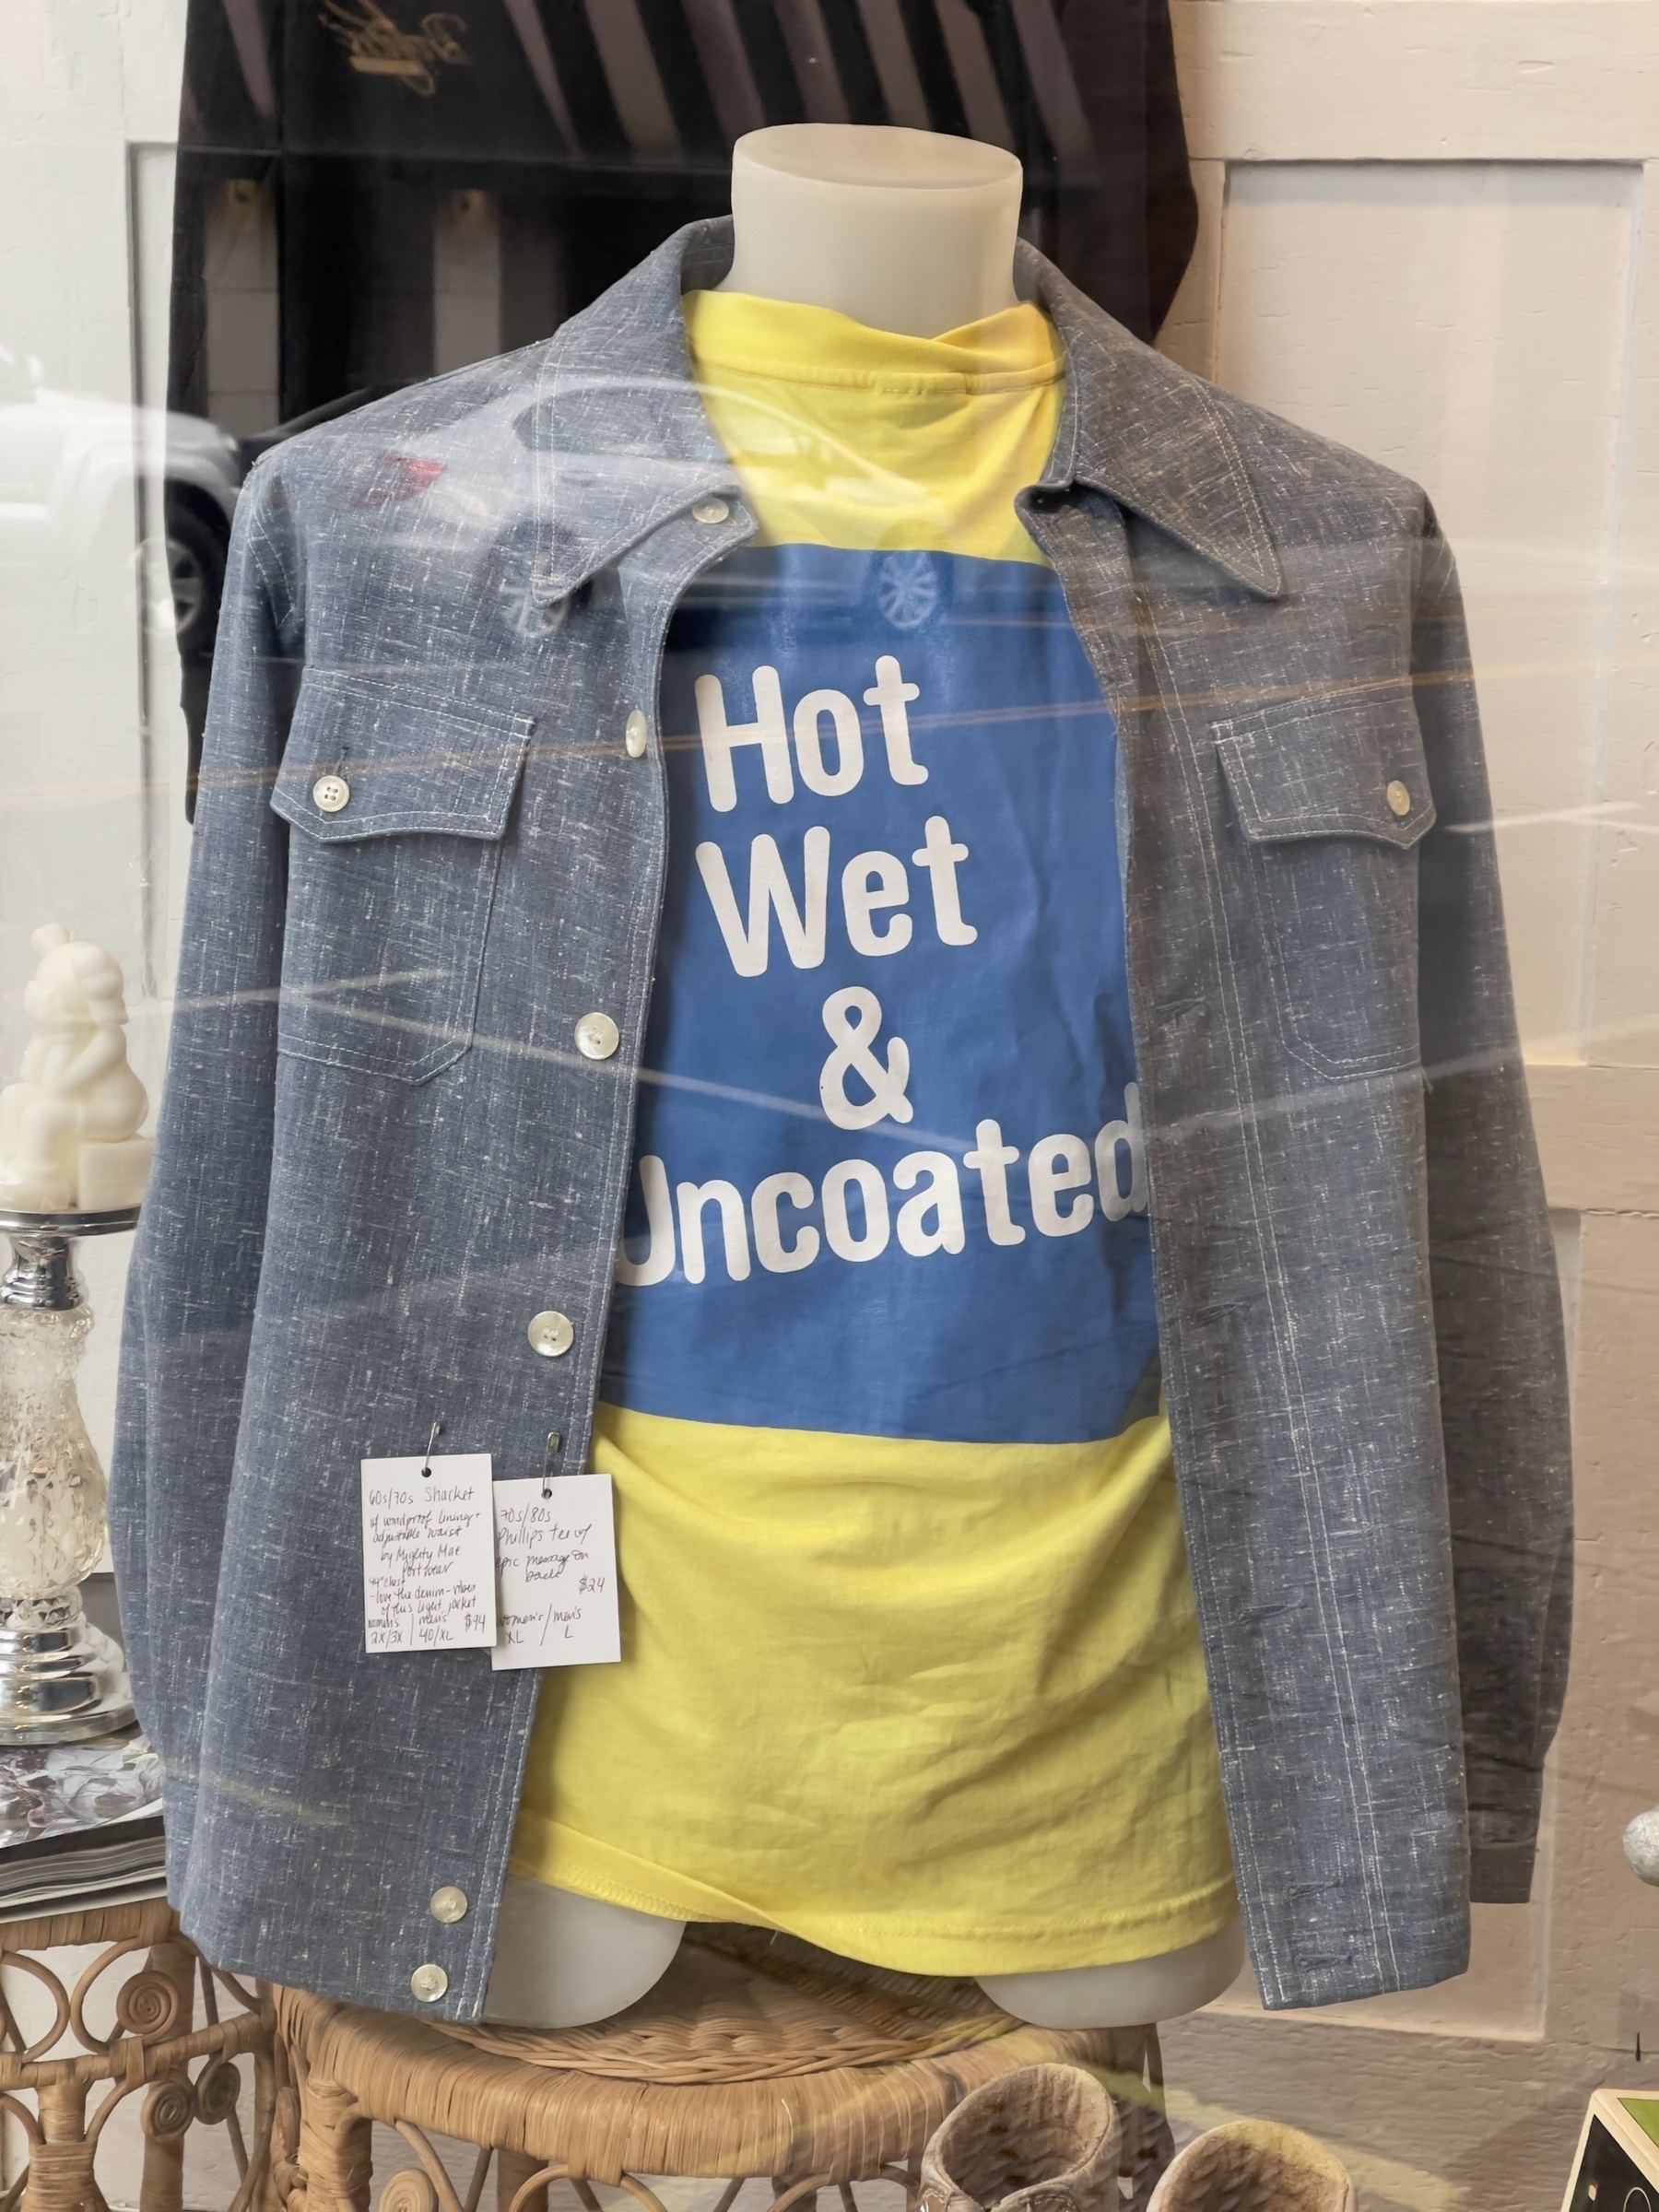 Shop display, “hot, wet and uncoated” t-shirt with denim jacket.